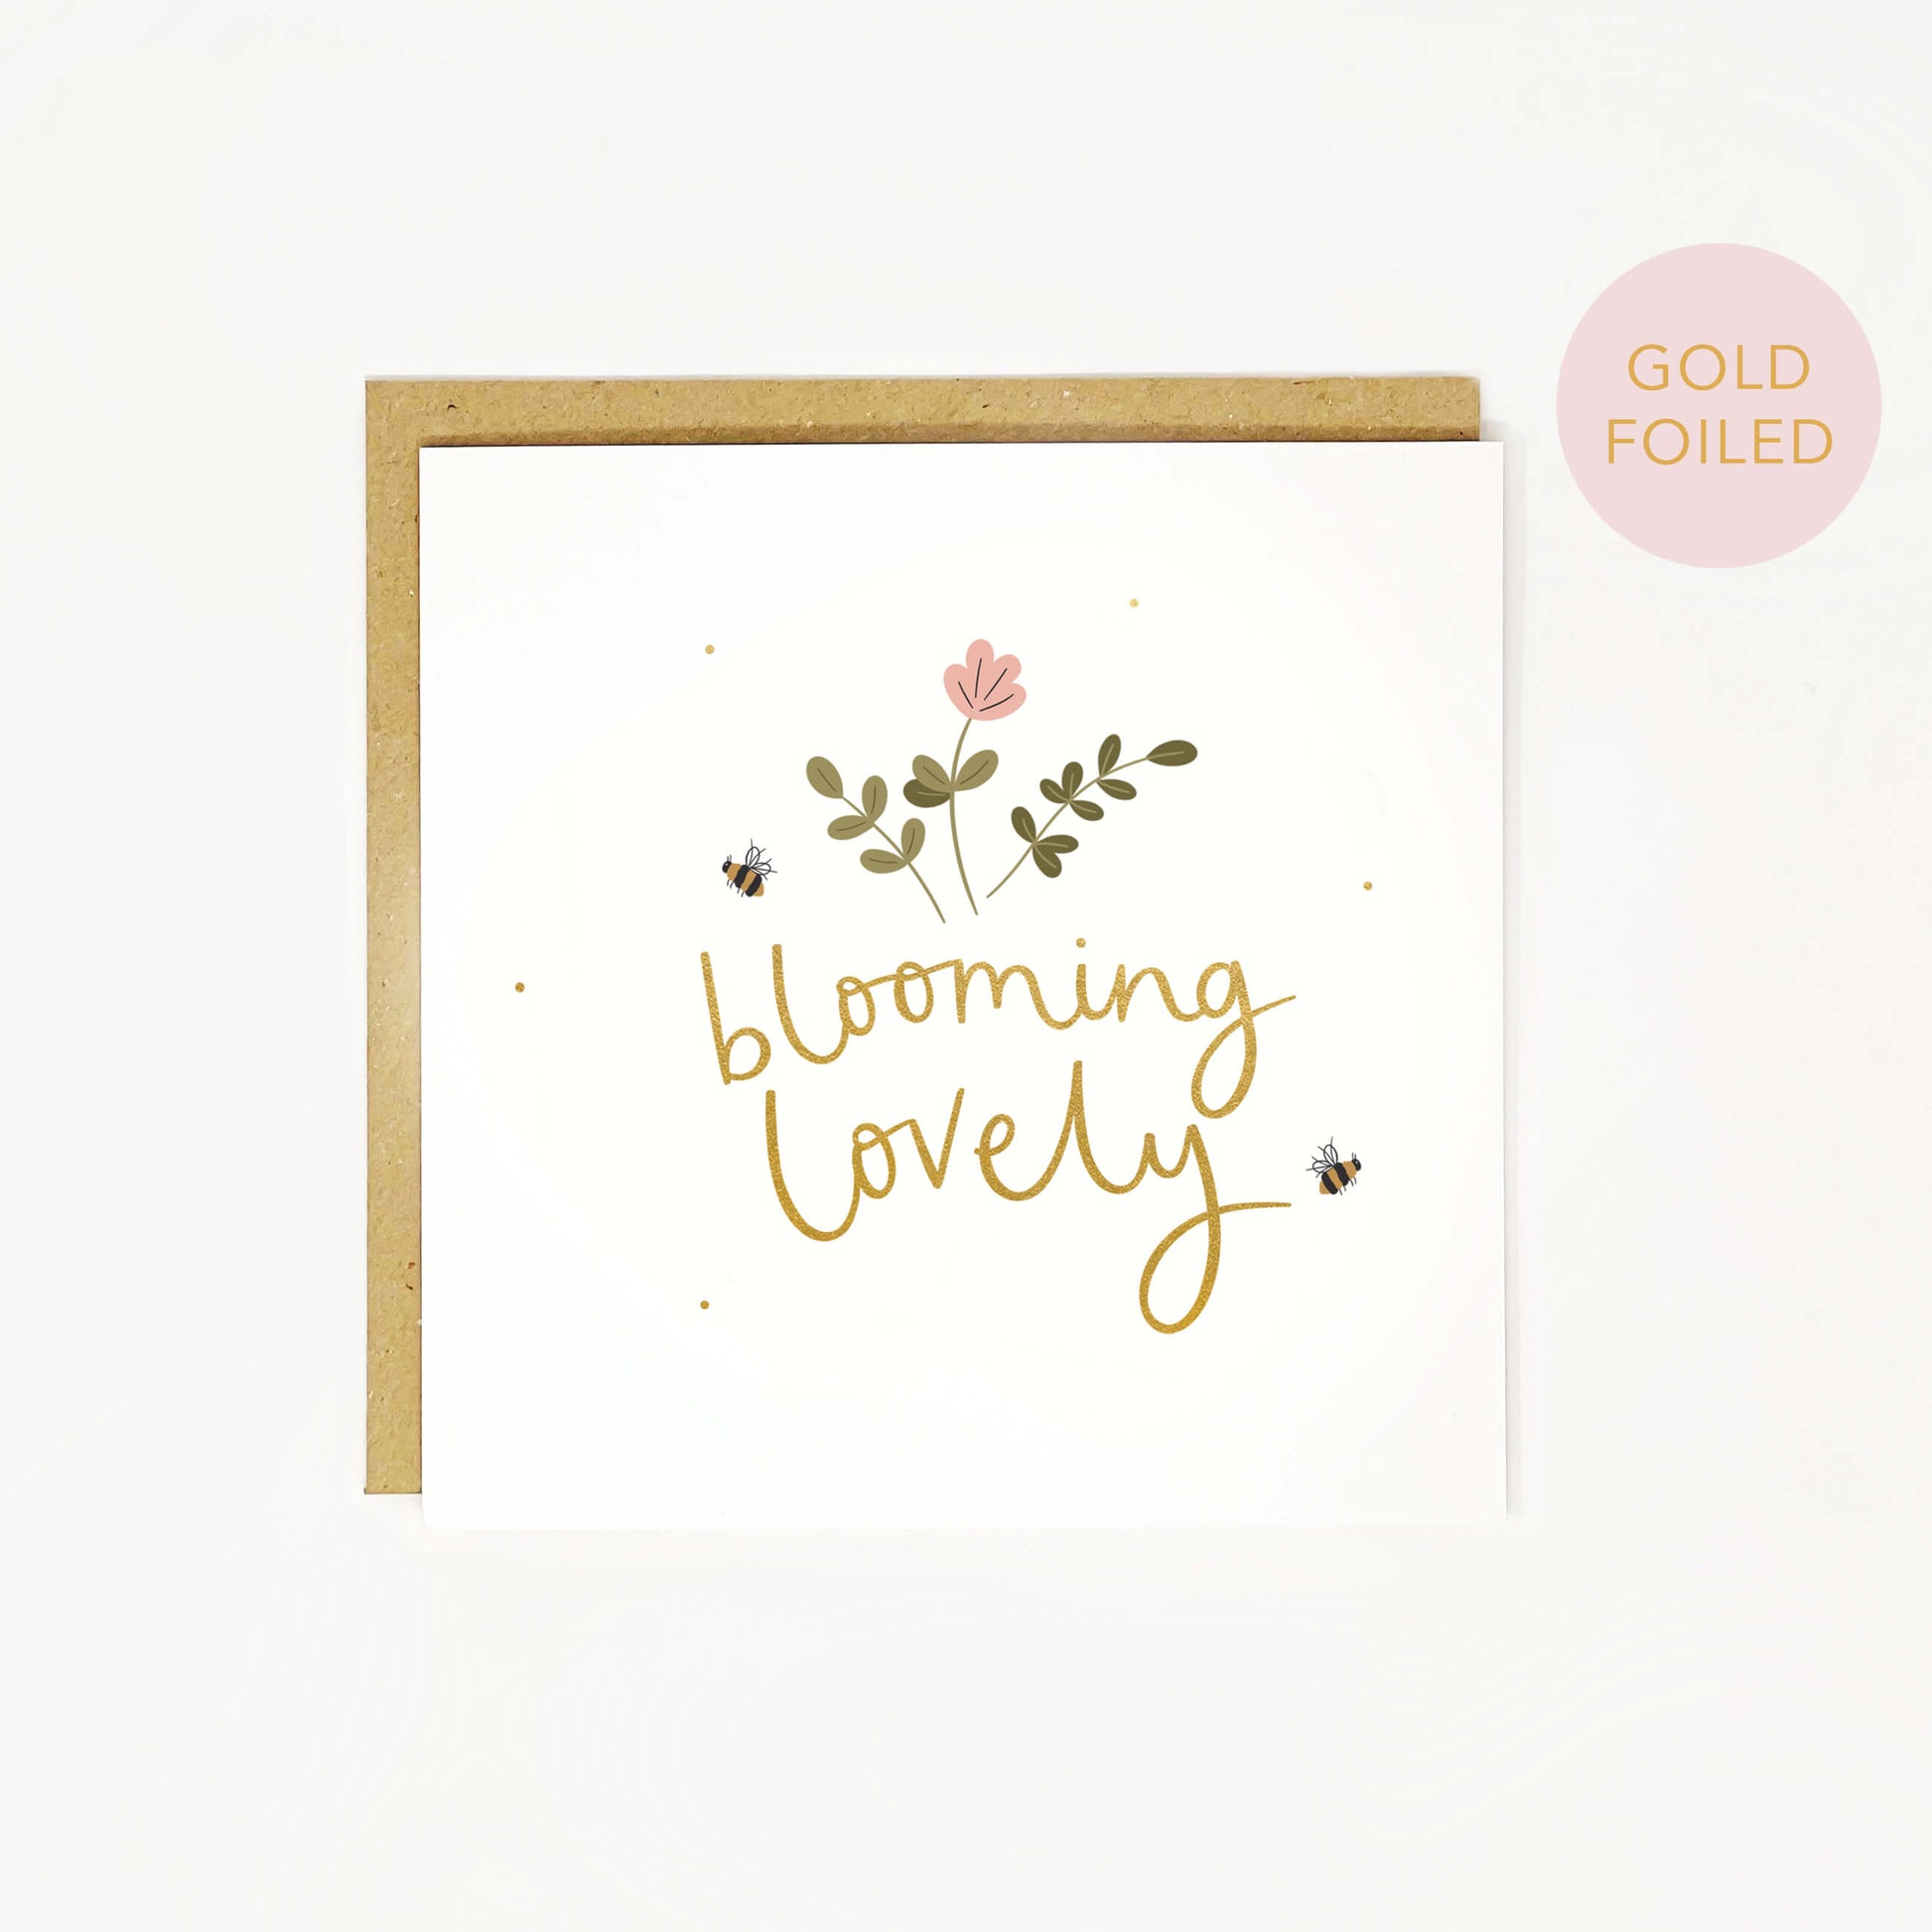 Blooming lovely gold foiled bee card seconds sale by Abbie Imagine